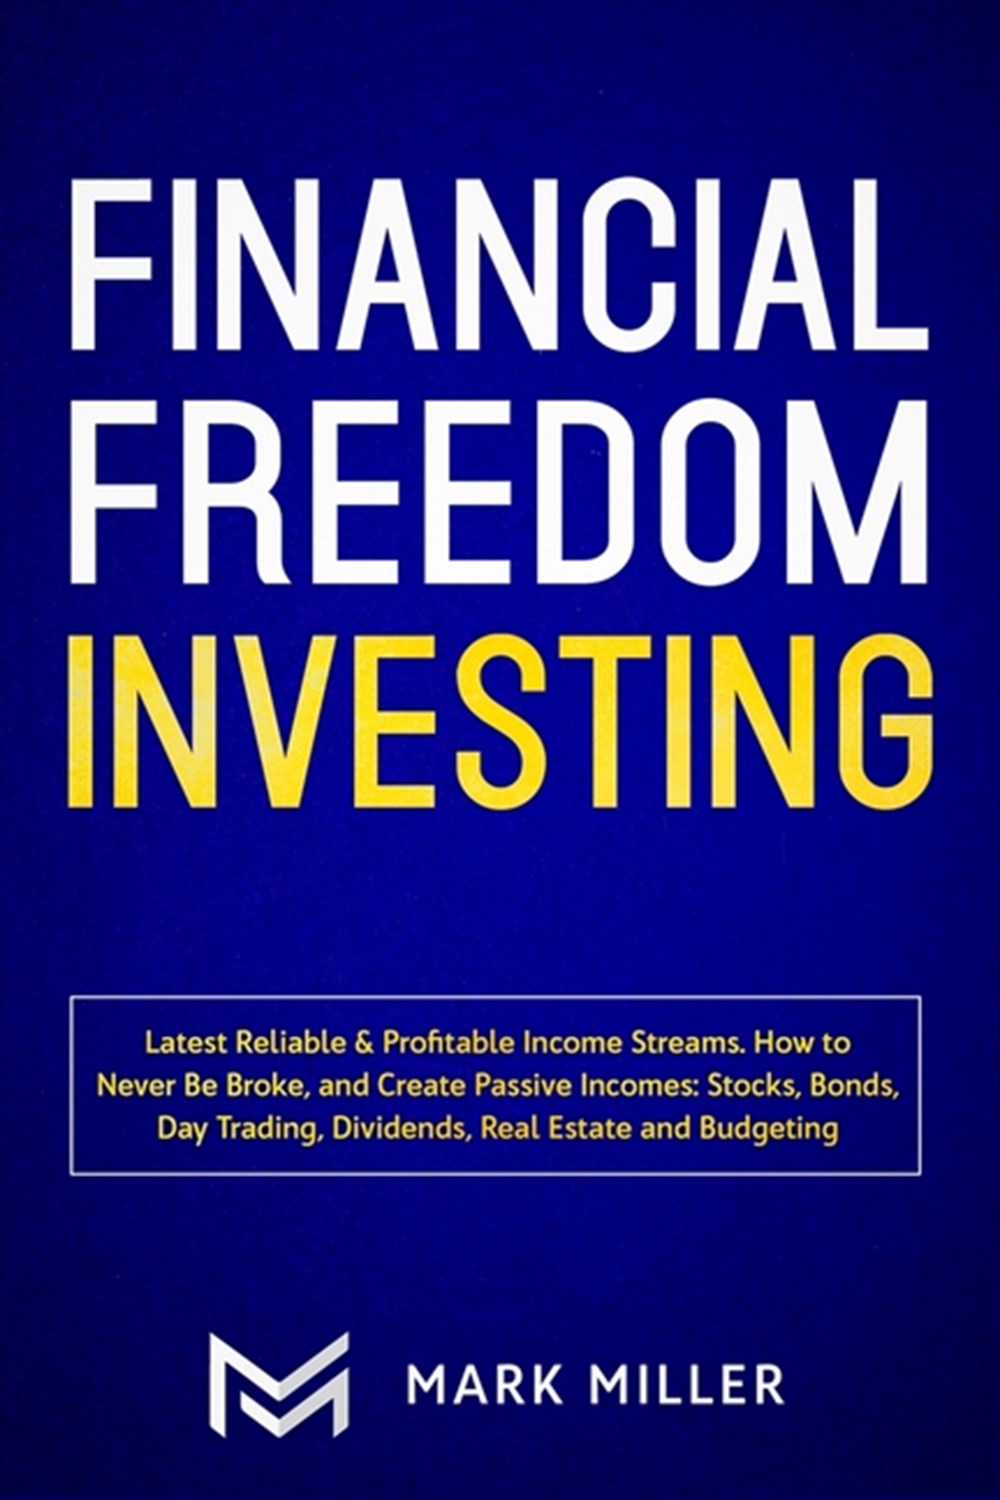 Financial Freedom Investing: Latest Reliable & Profitable Income Streams. How to Never Be Broke and 